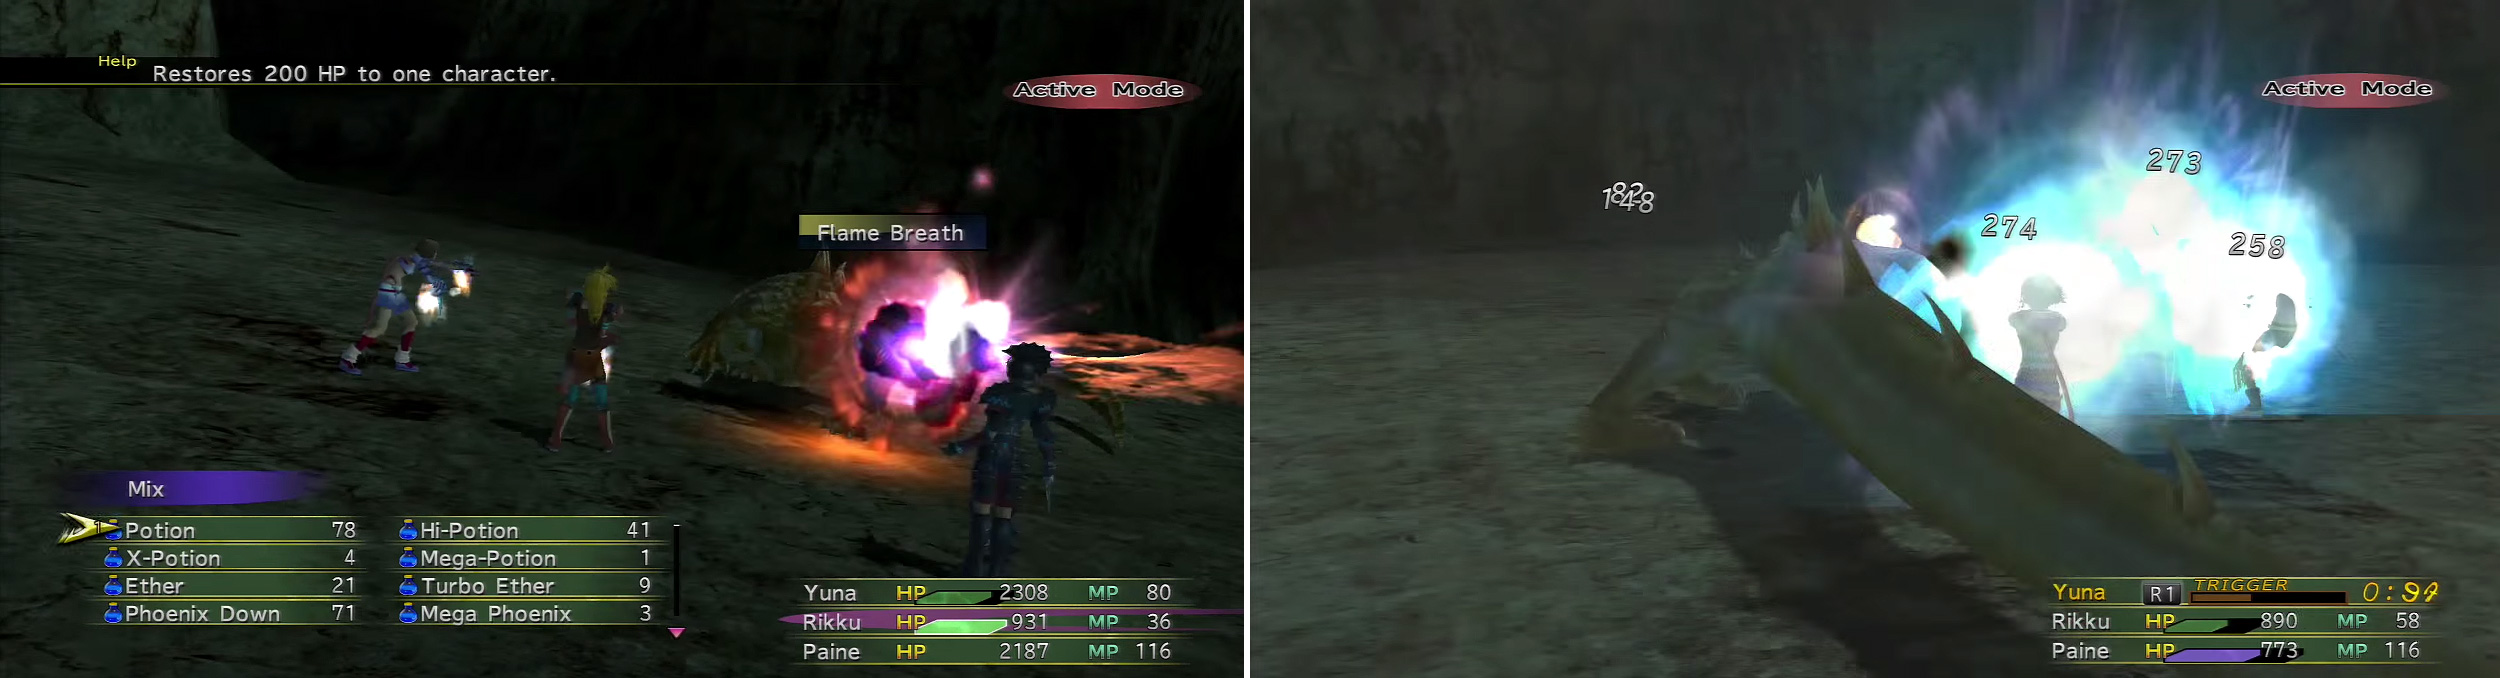 Like the Flame Dragon earlier in the game, Zalamander can use Flame Breath (left) but he he also has a Tail Smash (right). Protect is a must in this battle.